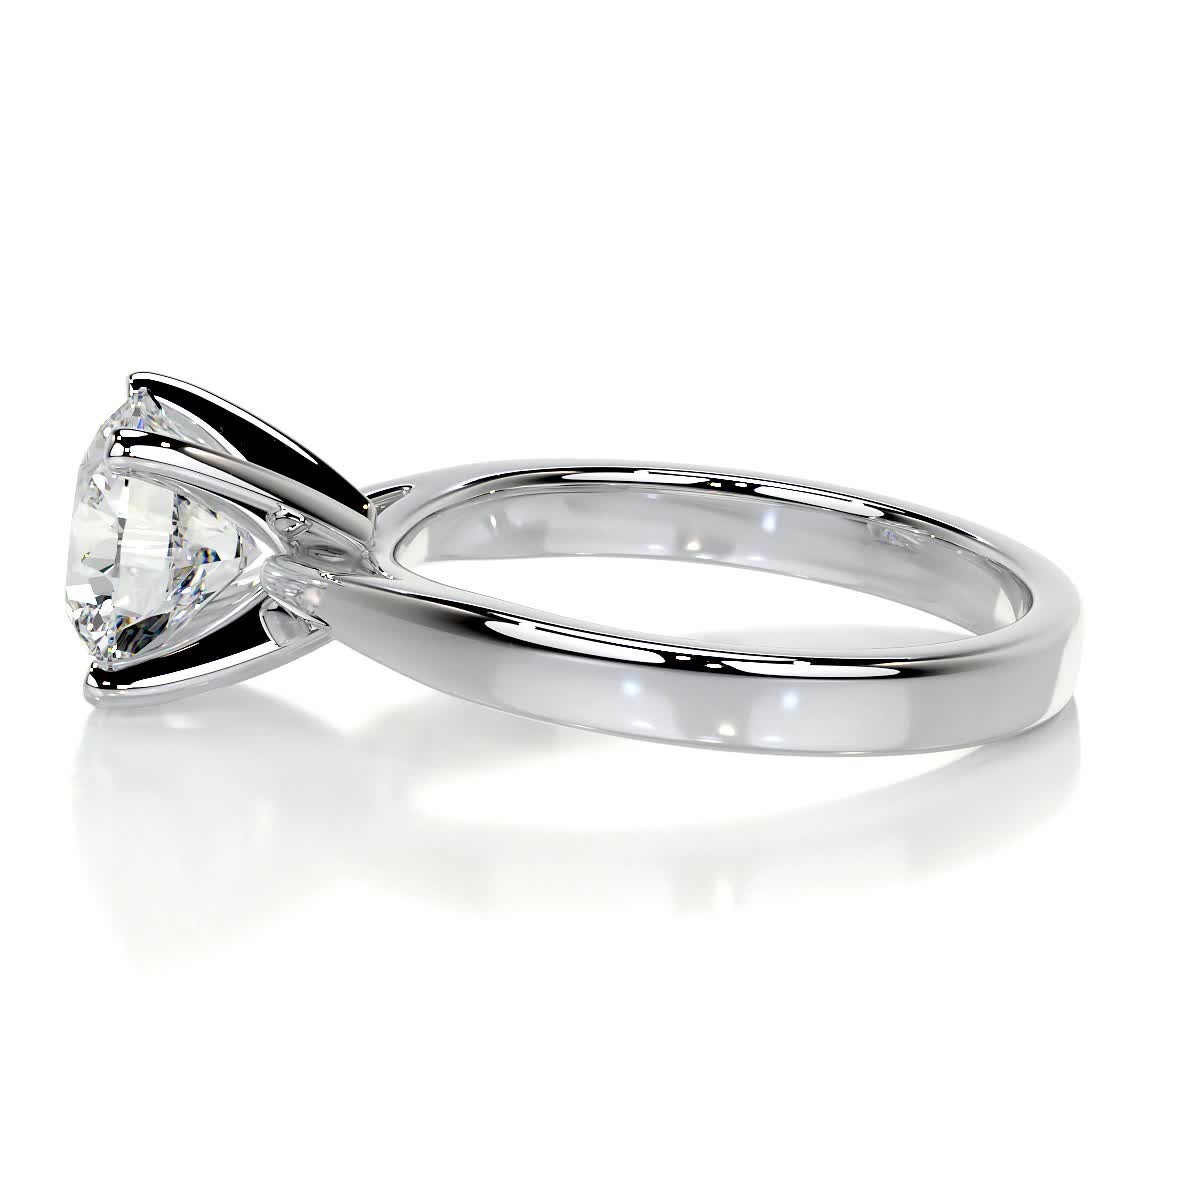 2.0 CT Round Solitaire CVD H/VS2 Diamond Engagement Ring 4